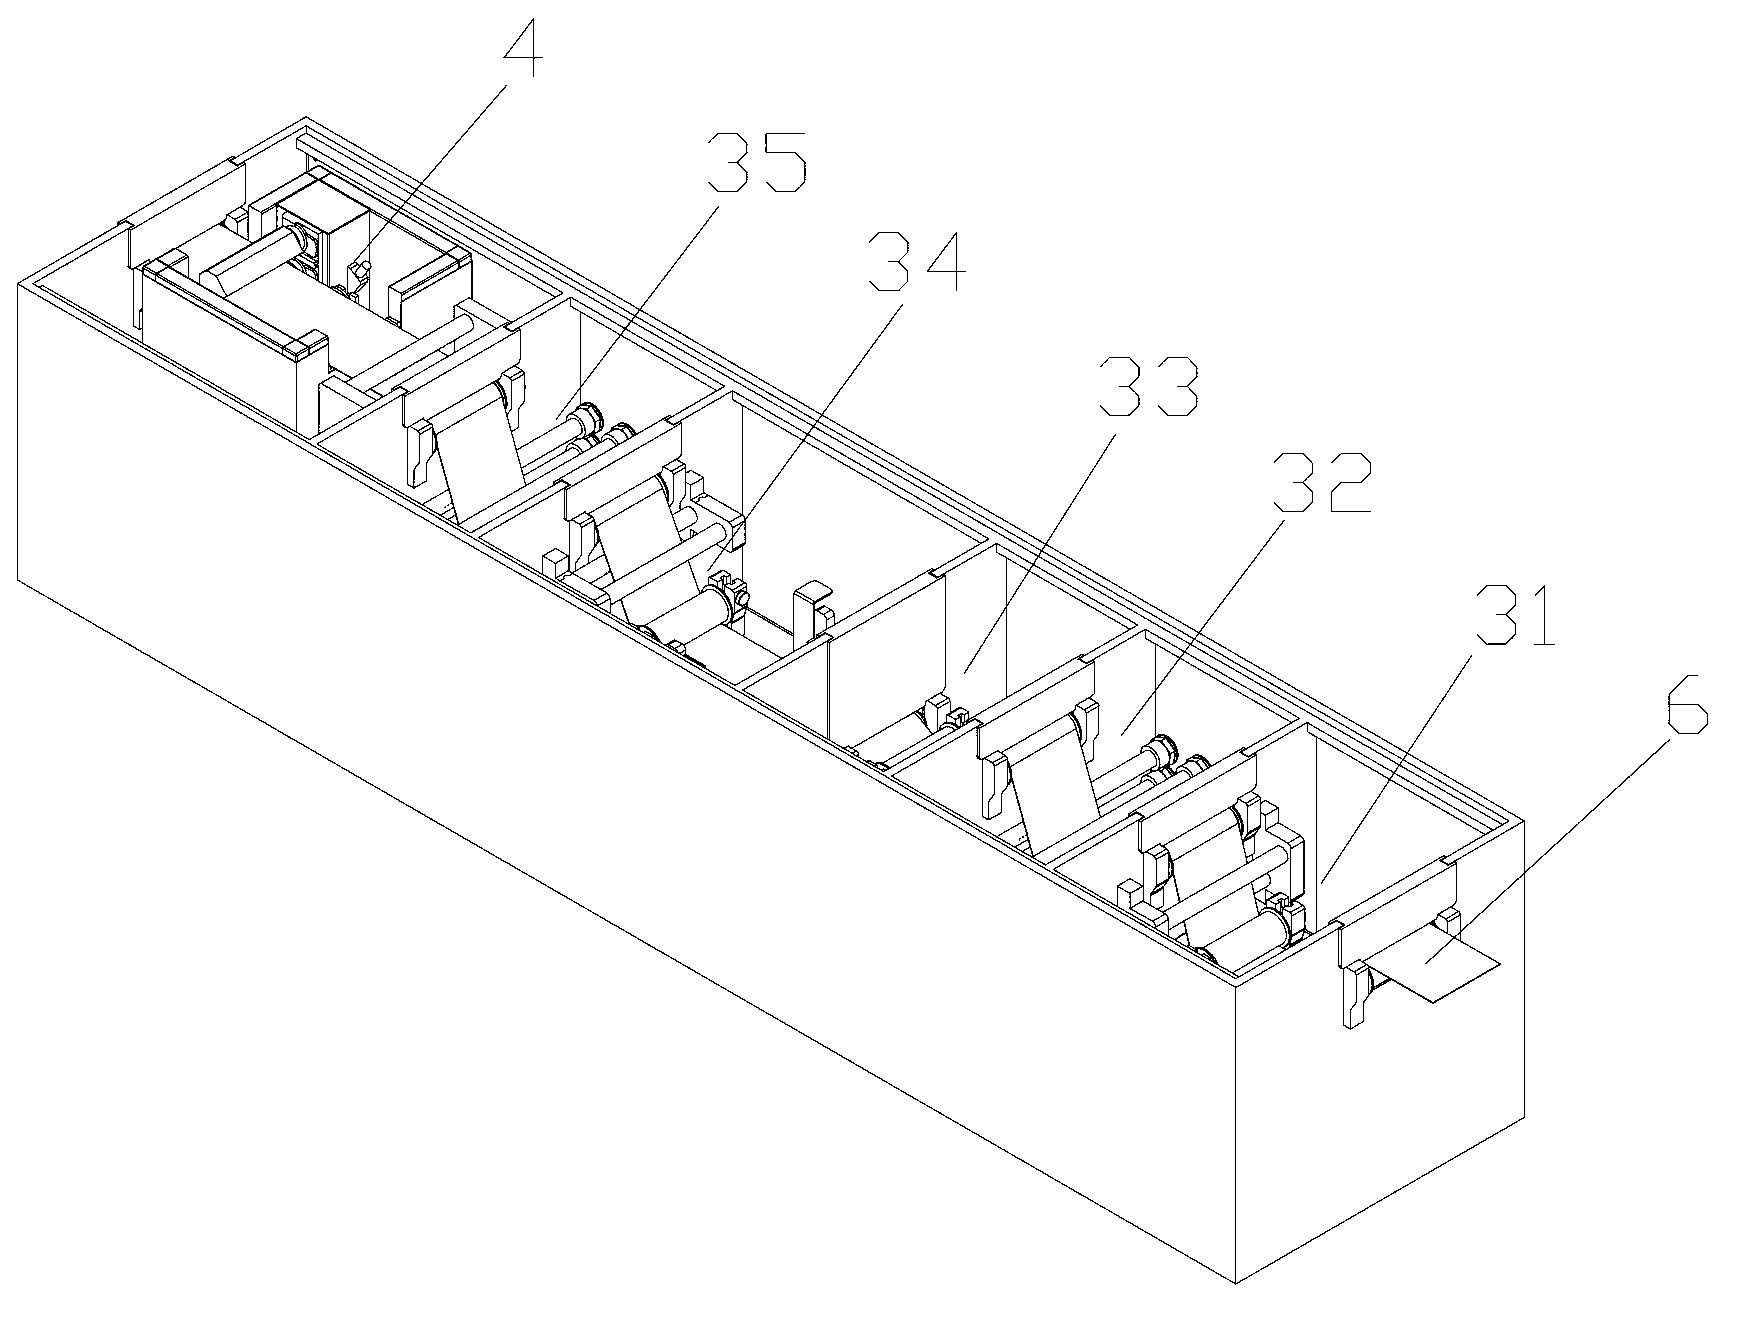 Flexible carrier sheet electroplating device